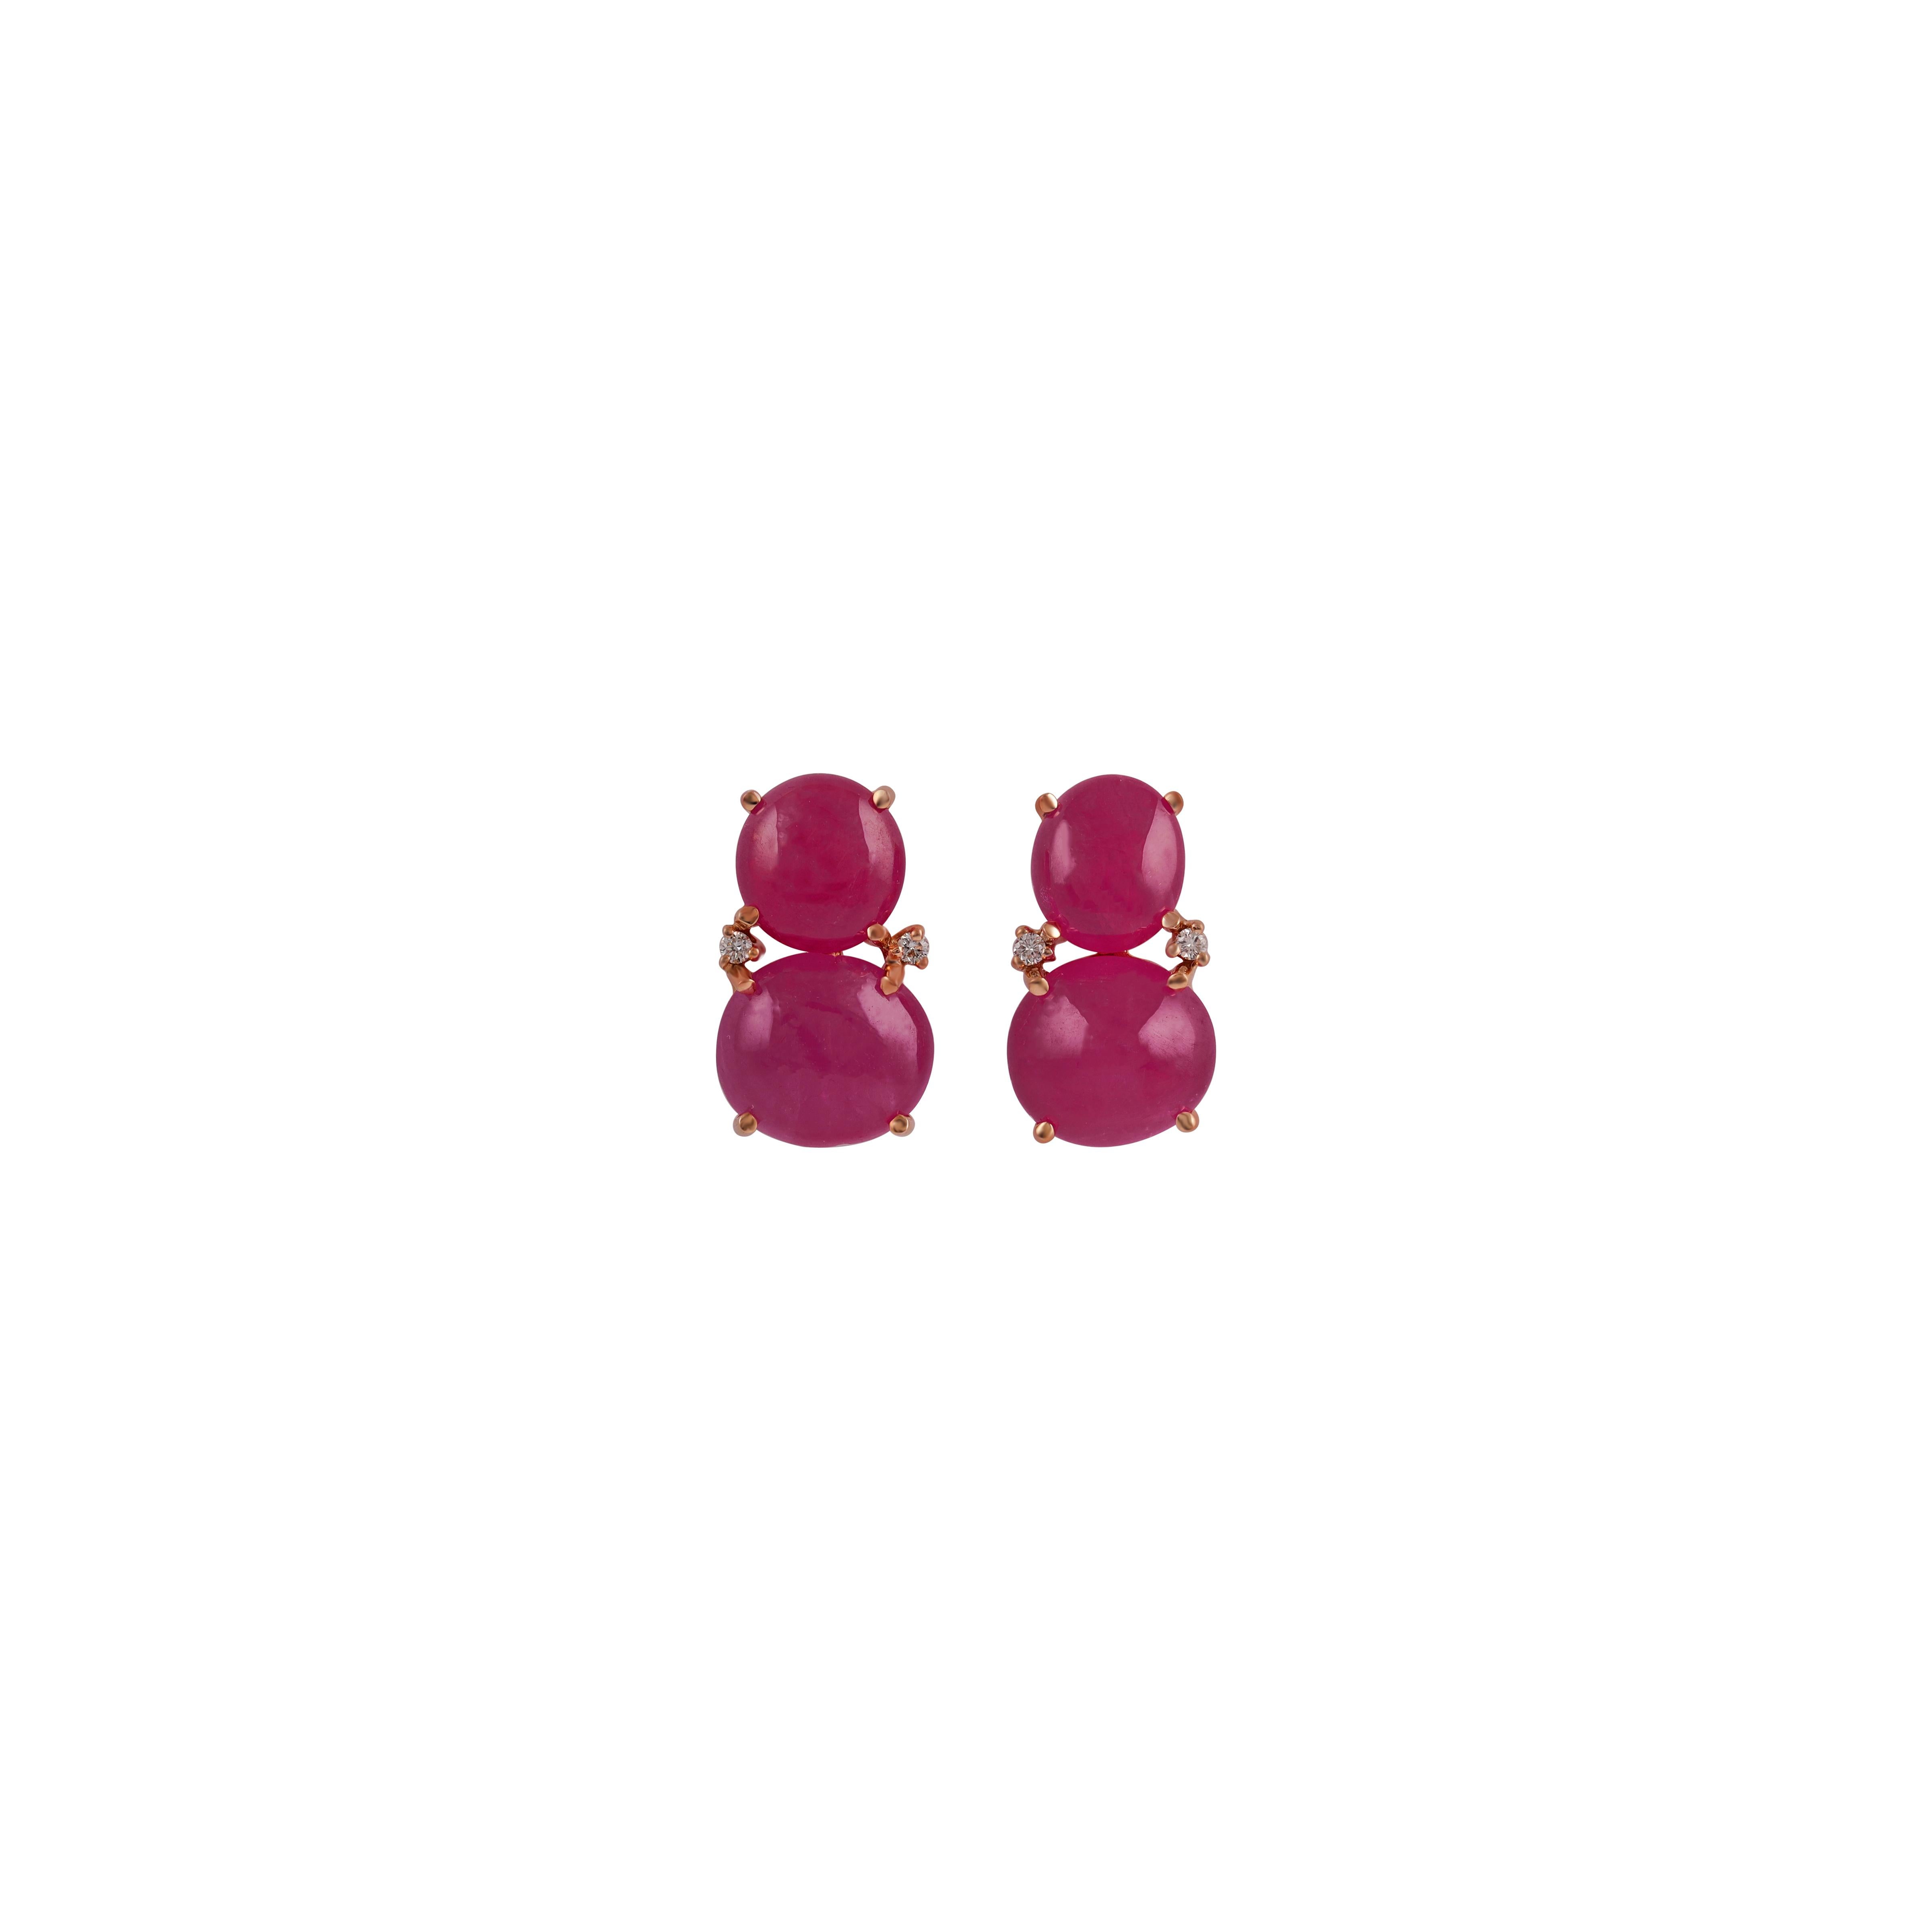 Round Cut Ruby Cabochon Studs Earring in 18 Karat Gold with Diamond For Sale